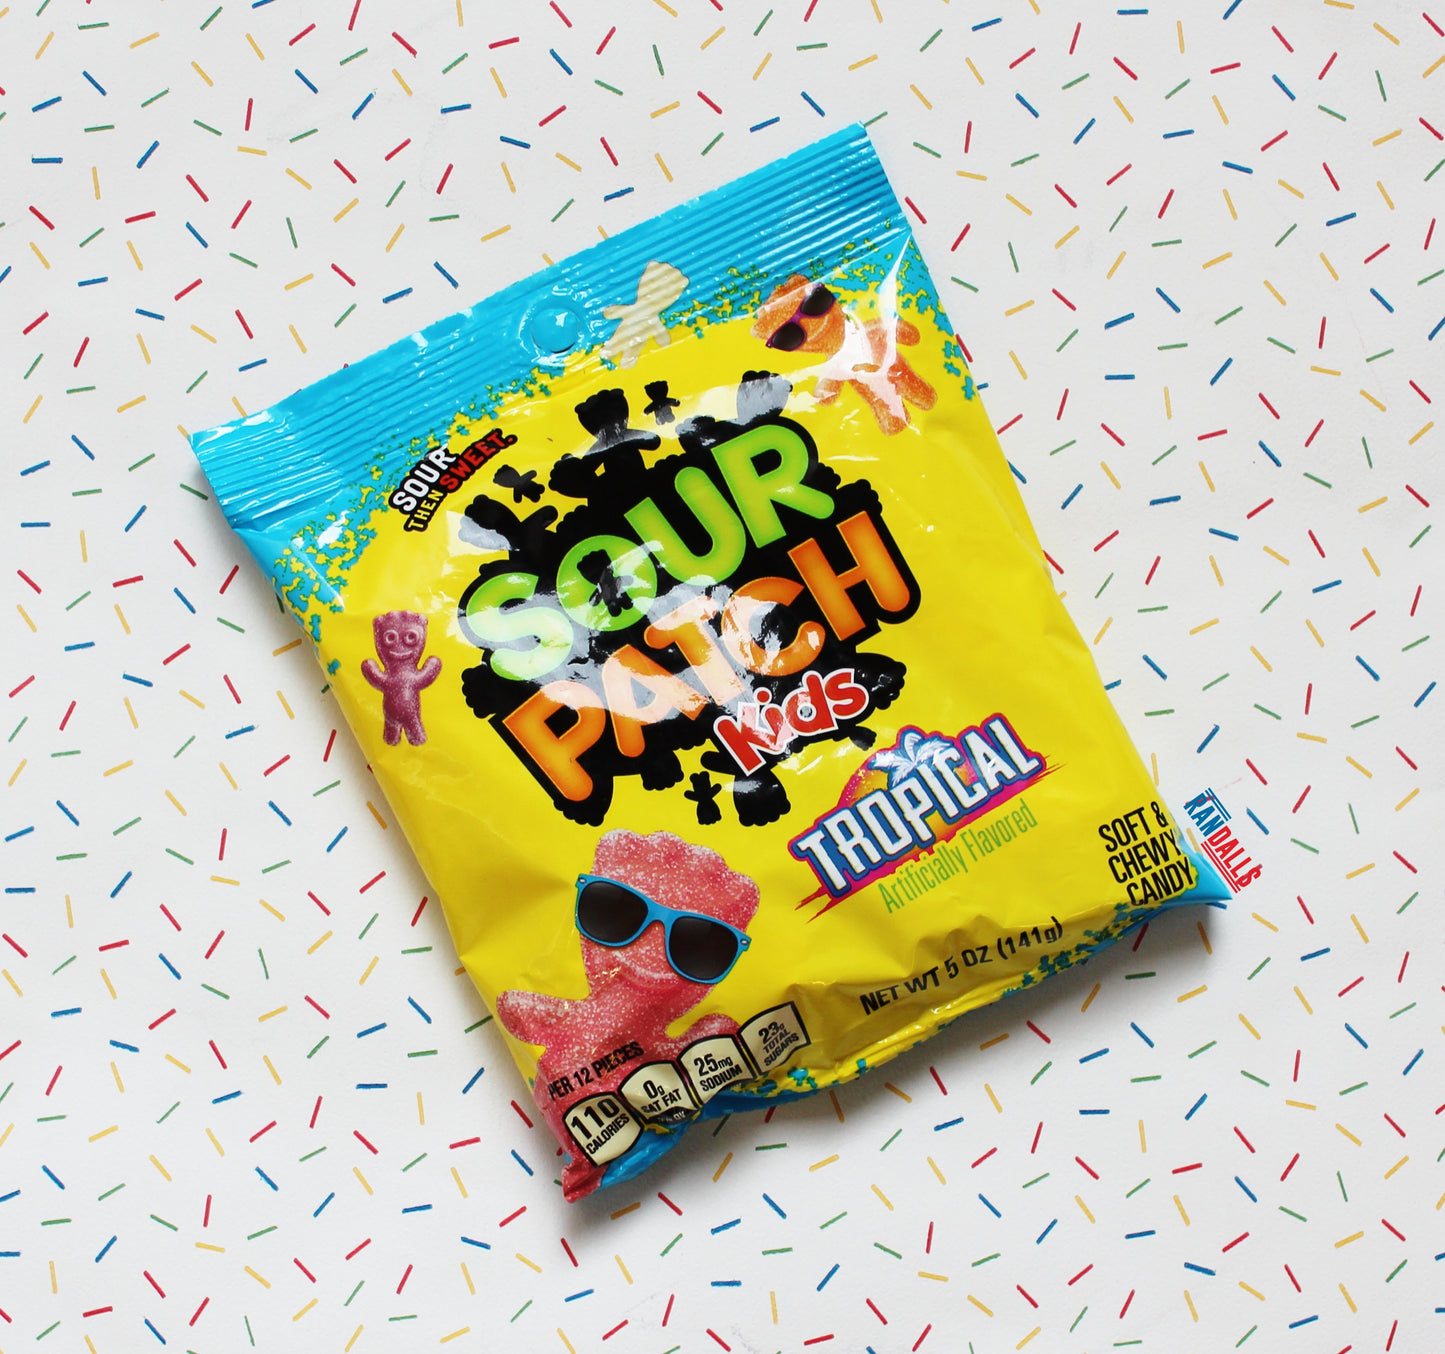 sour patch kids tropical peg bag, gummy, sweets, candy, chewy, fizzy, sugared, fruit flavoured, usa, randalls